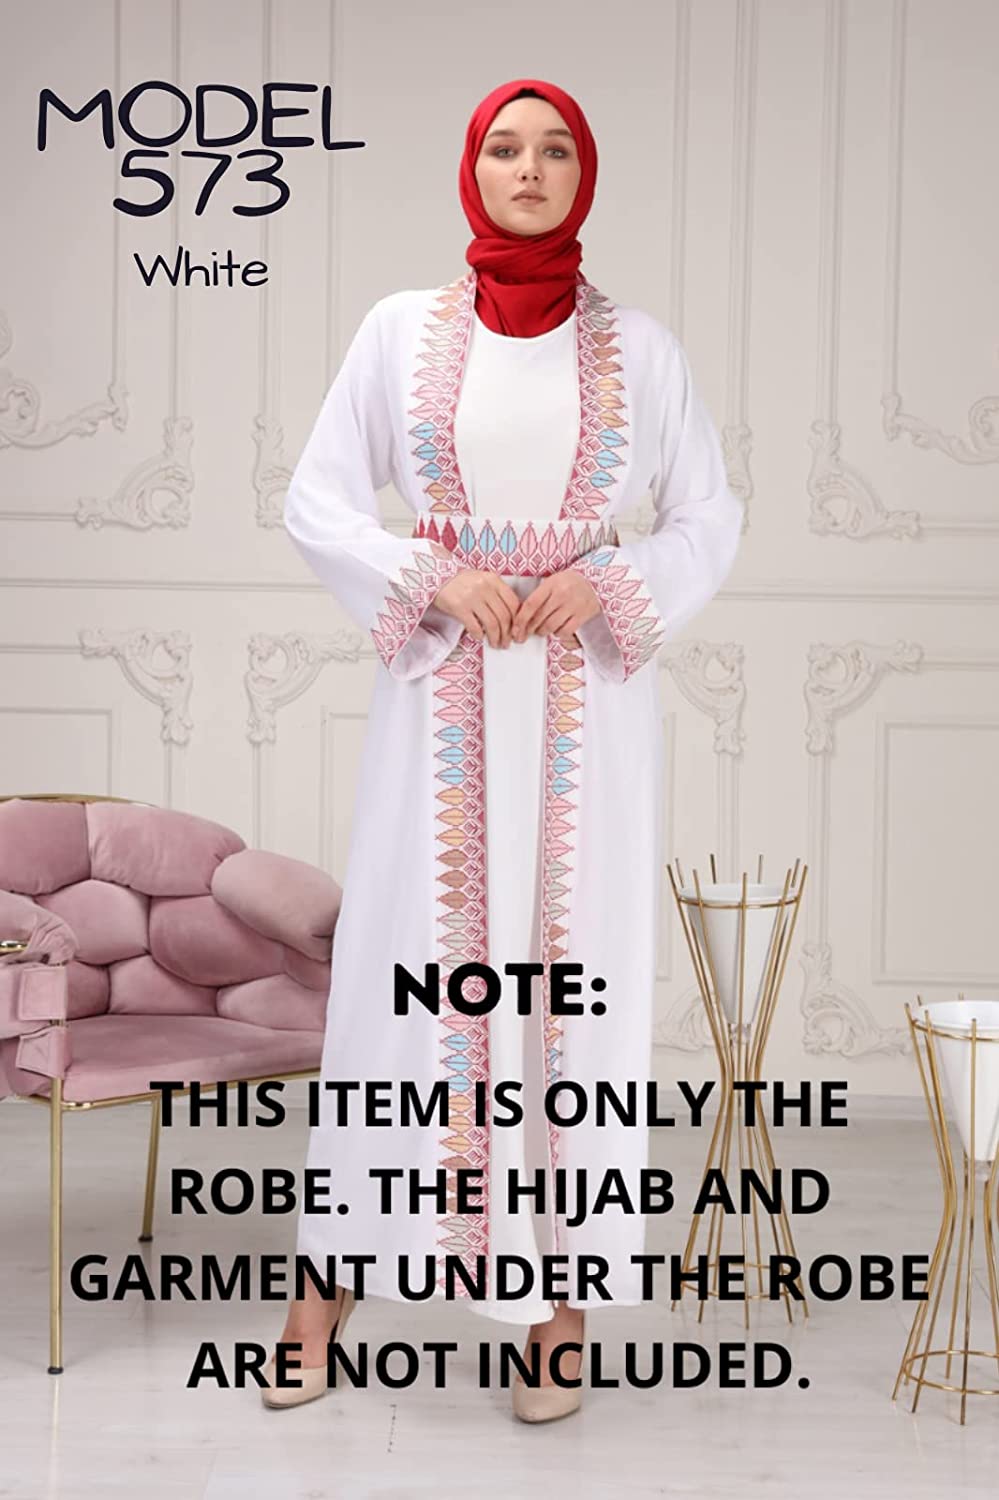 Marwa Fashion Thobe Dress for Women with Traditional Palestinian Embroidery - Islamic Muslim Costume Wedding, Party & Dinner (Medium, White)